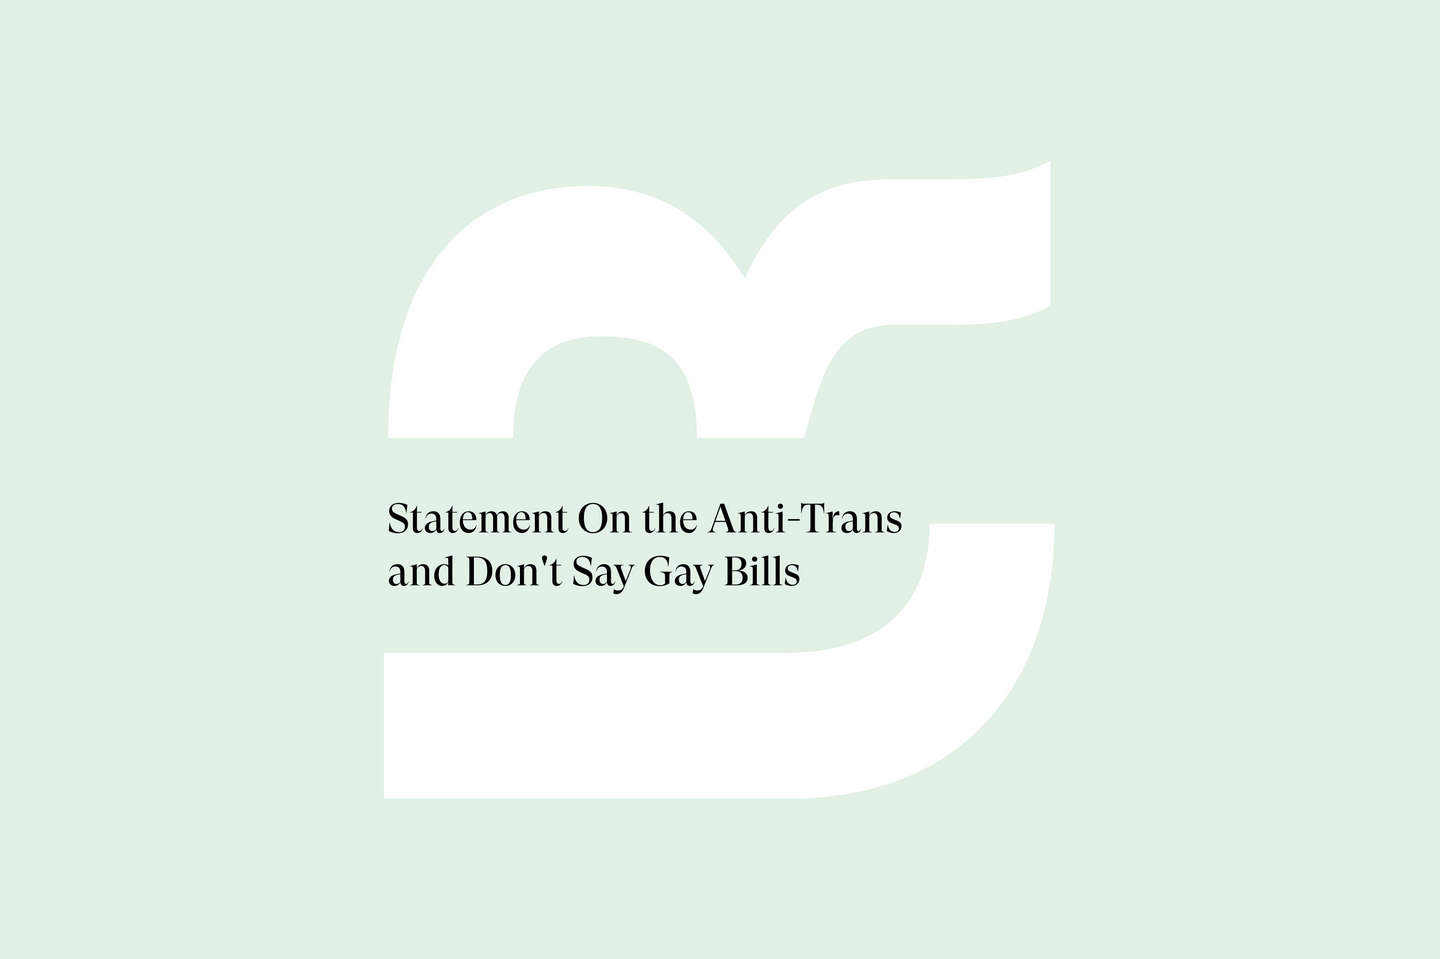 Statement On the Anti-Trans and Don't Say Gay Bills